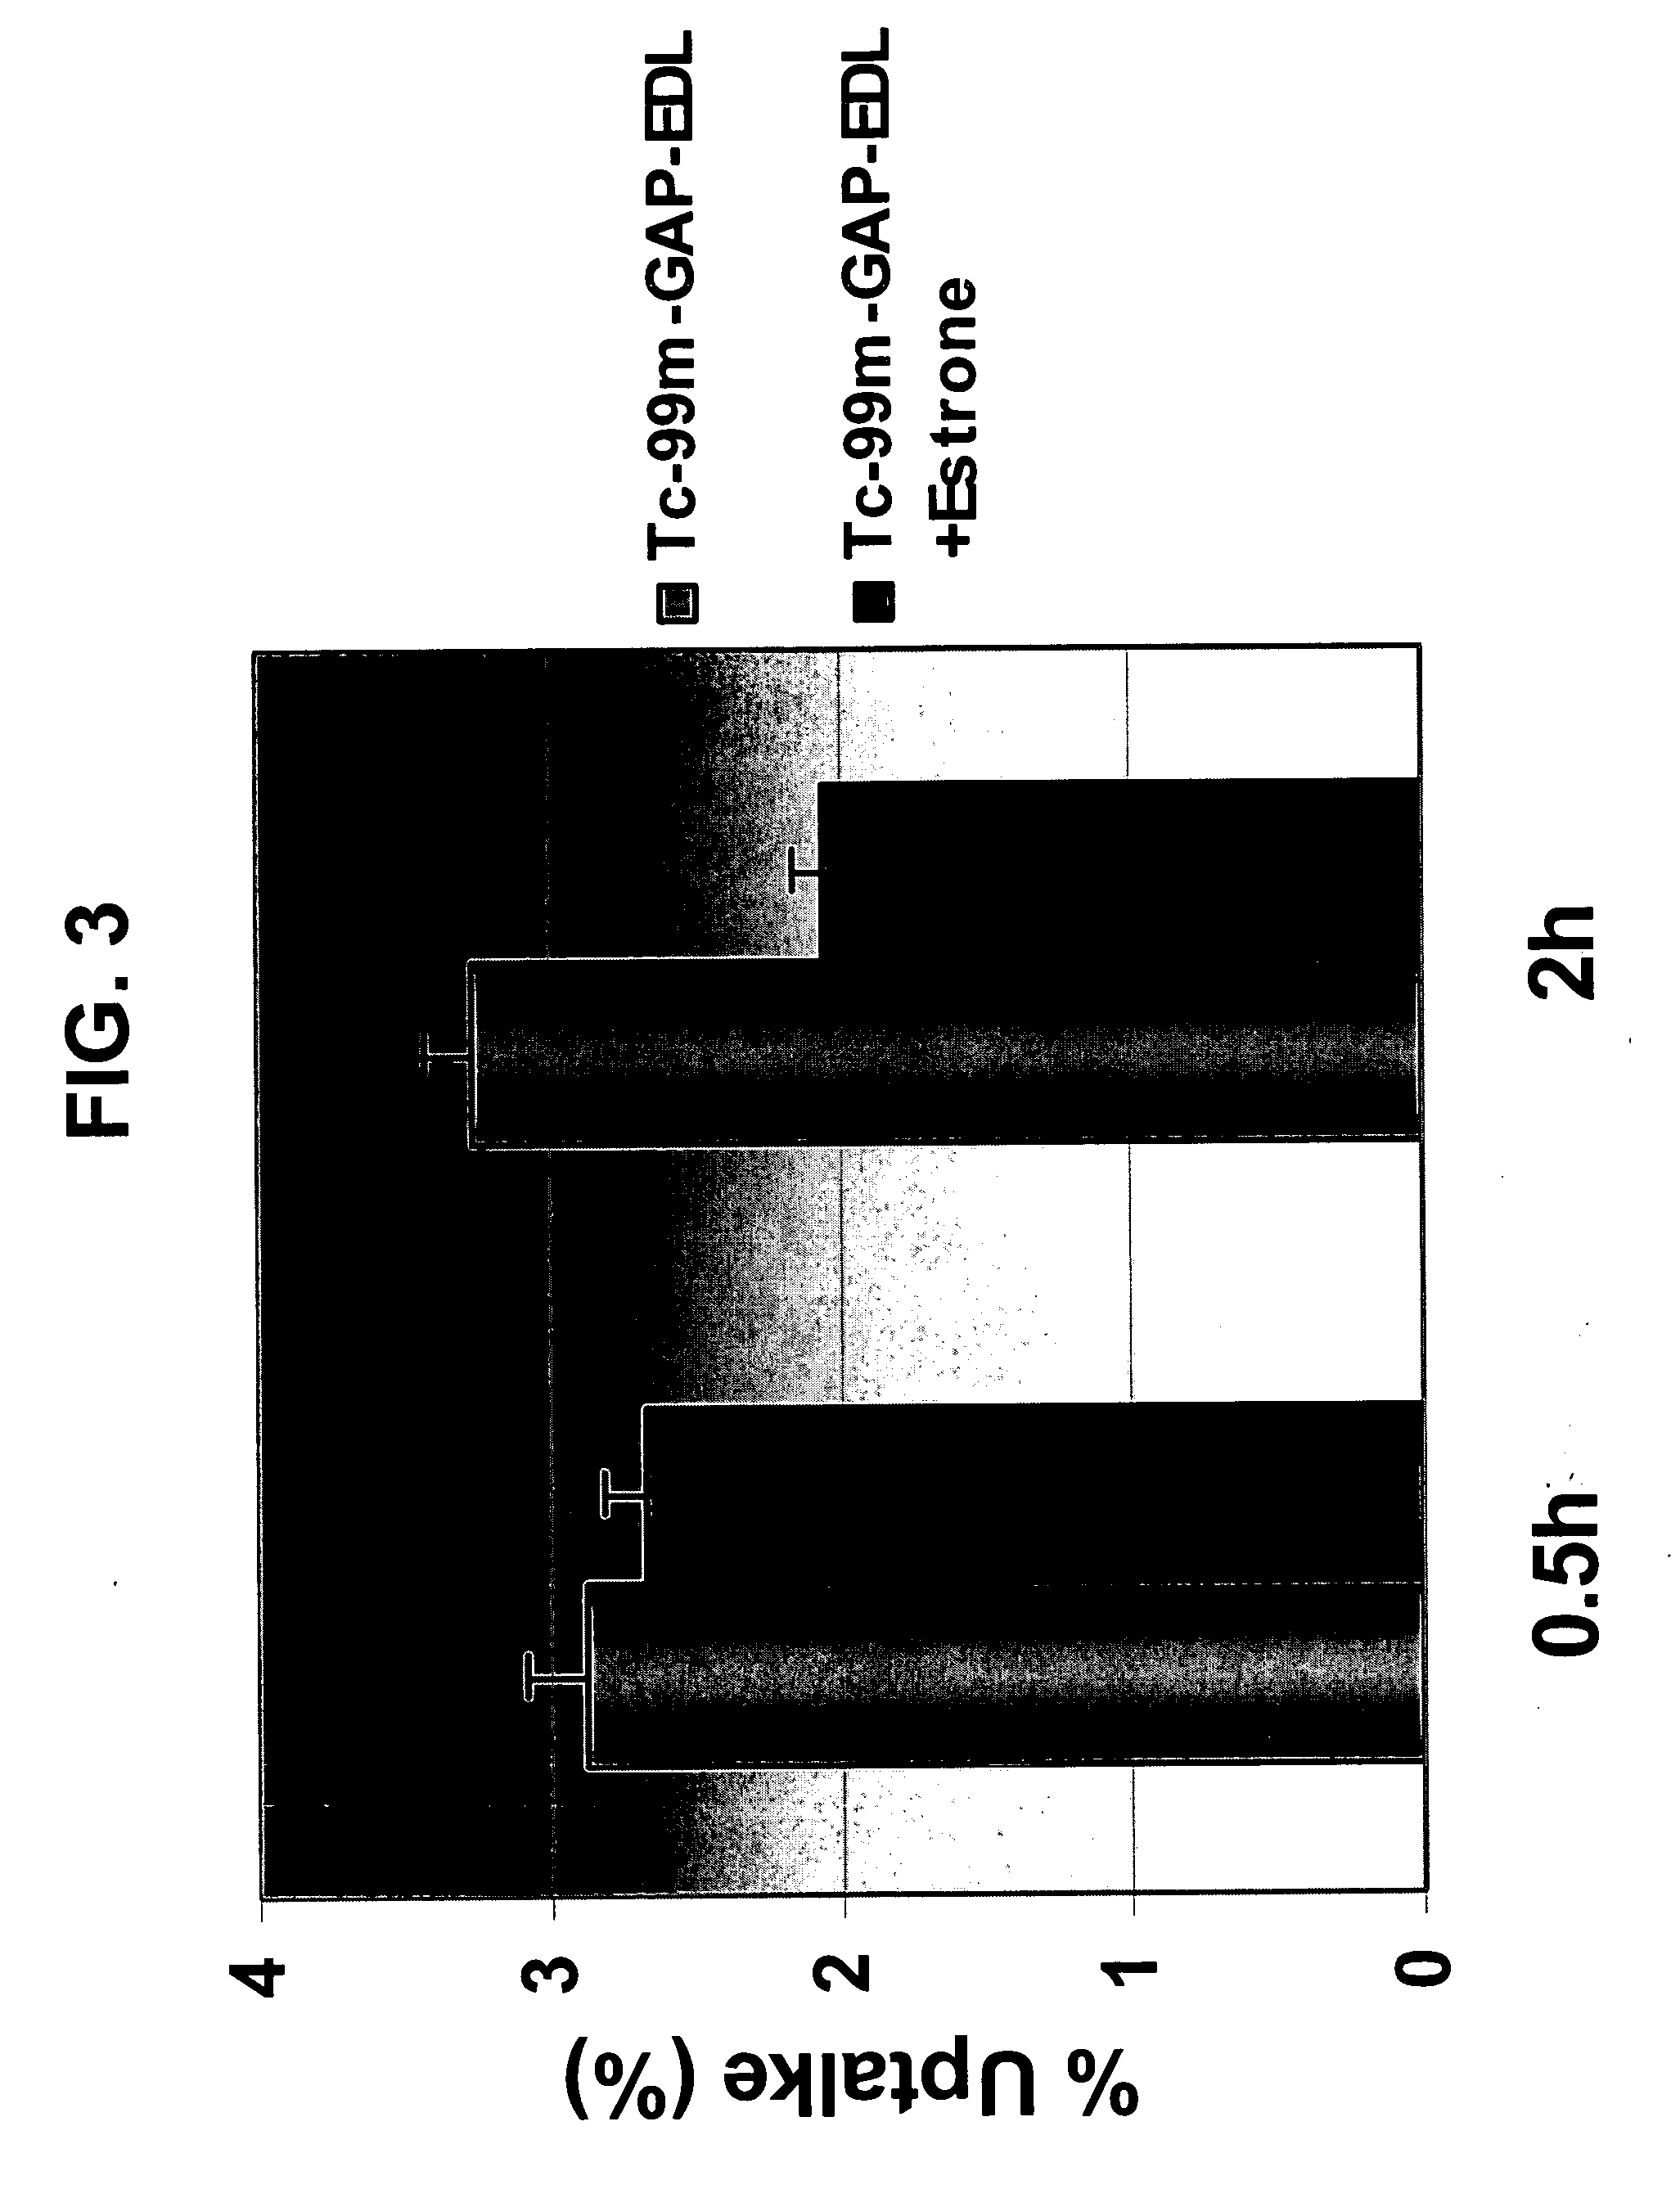 Poly(peptide) as a chelator: methods of manufacture and uses